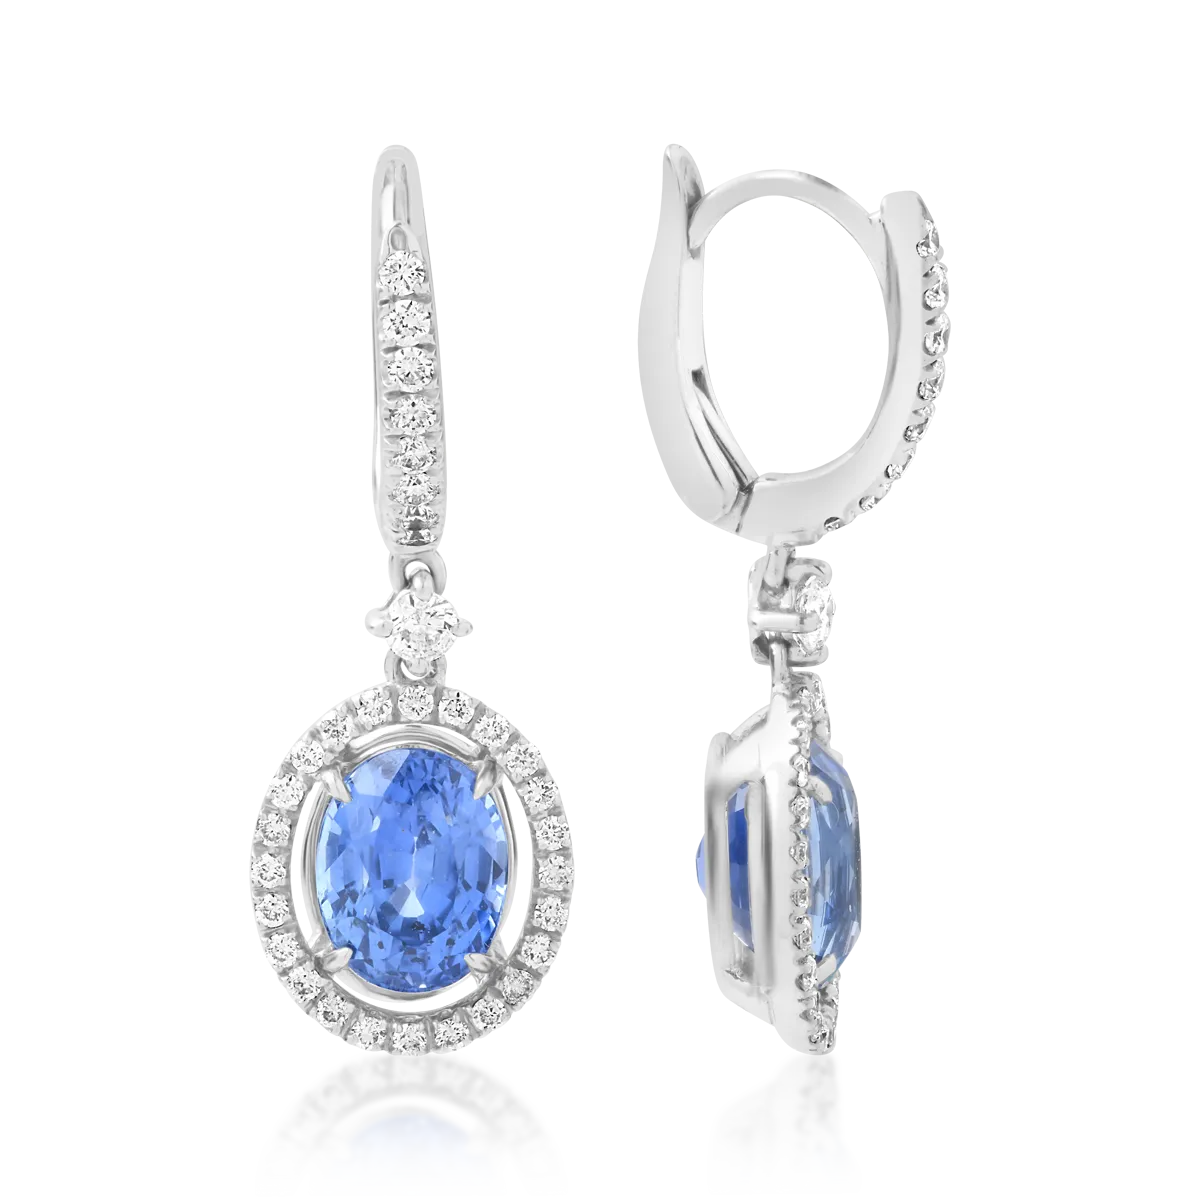 18K white gold earrings with 3.52ct sapphires and 0.48ct diamonds